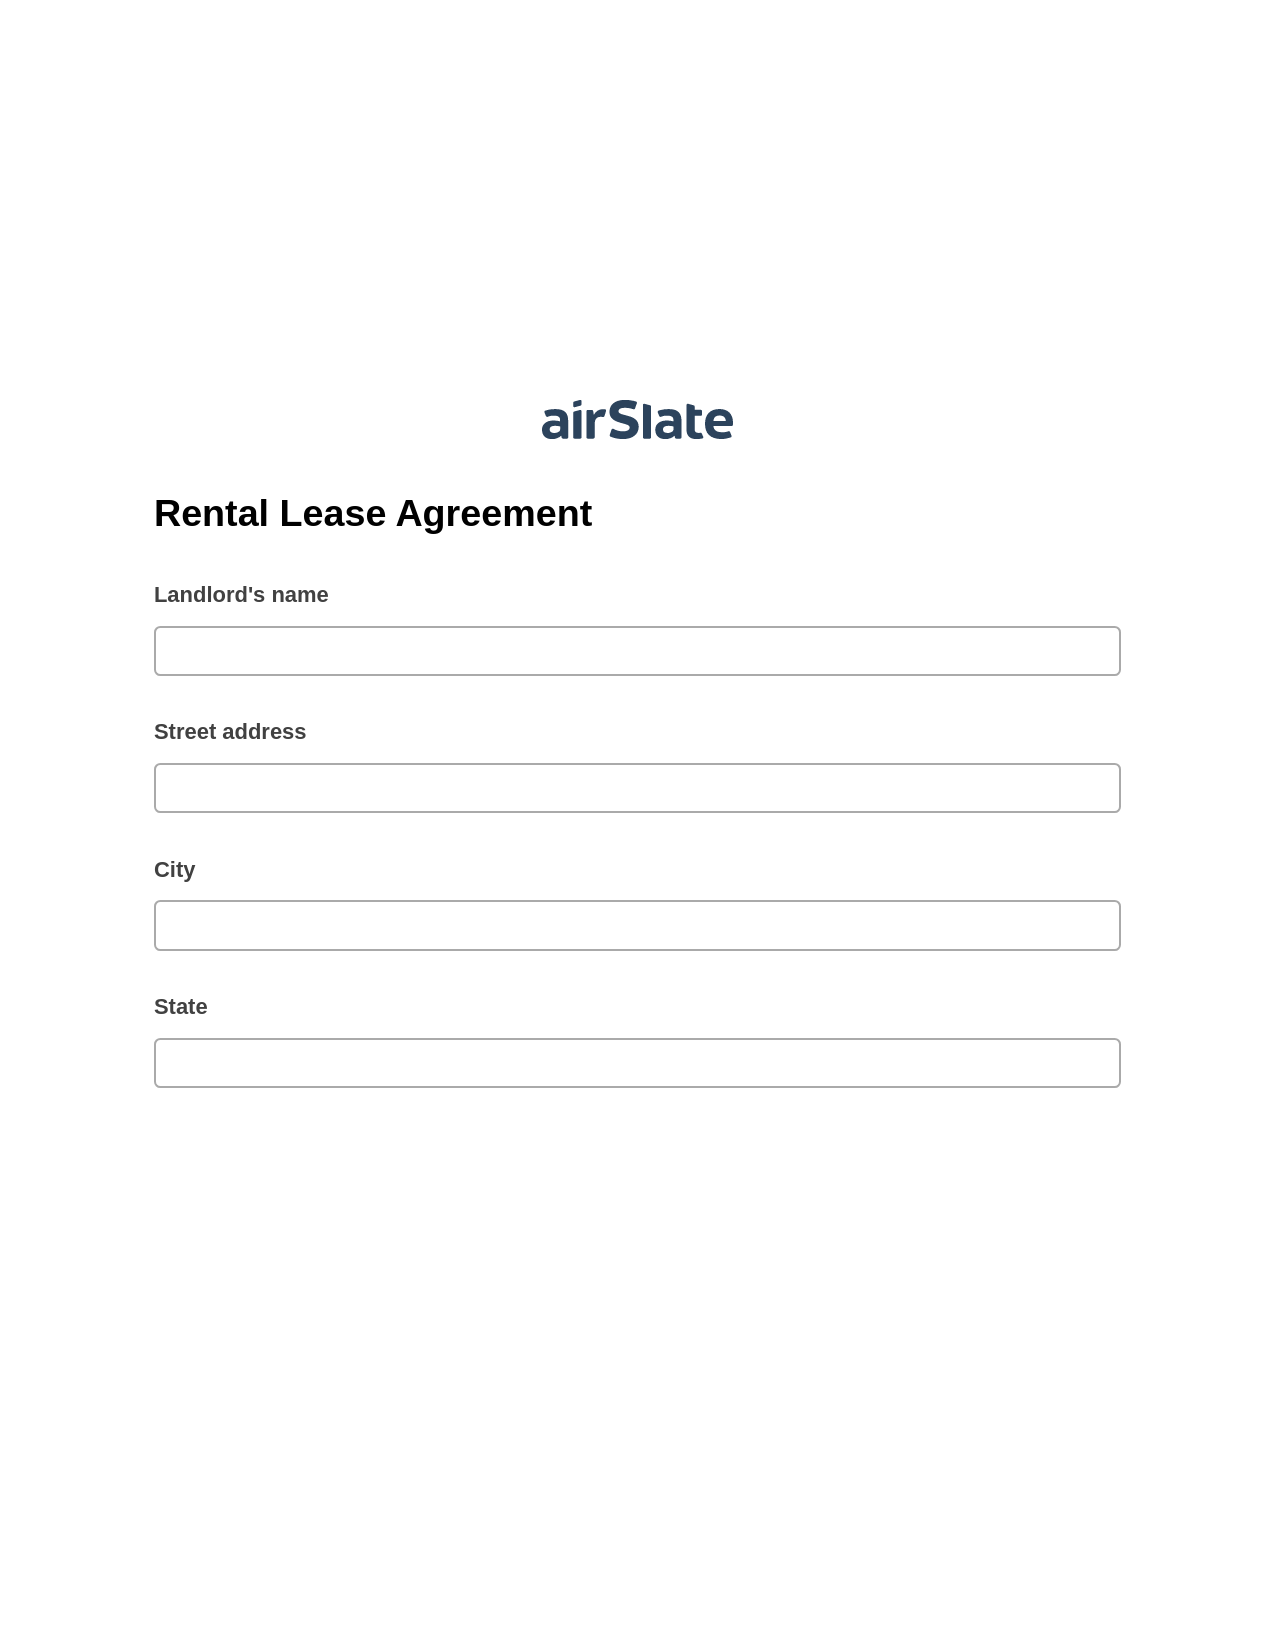 Multirole Rental Lease Agreement Pre-fill from CSV File Bot, Open as Role Bot, Export to Salesforce Bot